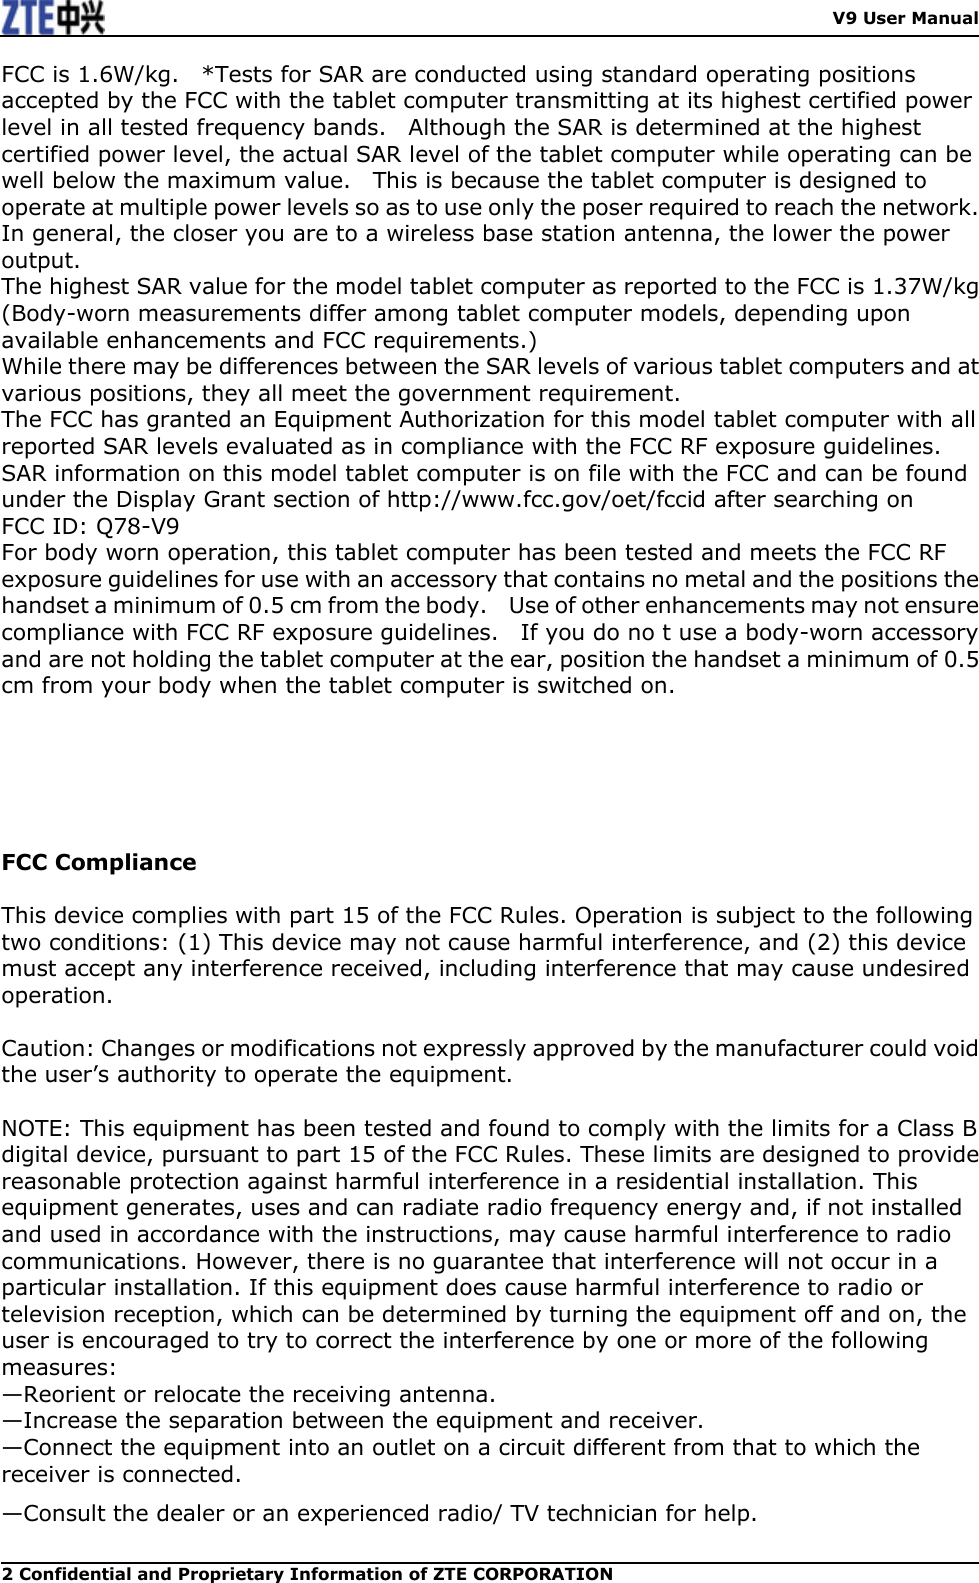    V9 User Manual 2 Confidential and Proprietary Information of ZTE CORPORATION FCC is 1.6W/kg.    *Tests for SAR are conducted using standard operating positions accepted by the FCC with the tablet computer transmitting at its highest certified power level in all tested frequency bands.    Although the SAR is determined at the highest certified power level, the actual SAR level of the tablet computer while operating can be well below the maximum value.    This is because the tablet computer is designed to operate at multiple power levels so as to use only the poser required to reach the network.  In general, the closer you are to a wireless base station antenna, the lower the power output. The highest SAR value for the model tablet computer as reported to the FCC is 1.37W/kg (Body-worn measurements differ among tablet computer models, depending upon available enhancements and FCC requirements.) While there may be differences between the SAR levels of various tablet computers and at various positions, they all meet the government requirement. The FCC has granted an Equipment Authorization for this model tablet computer with all reported SAR levels evaluated as in compliance with the FCC RF exposure guidelines.  SAR information on this model tablet computer is on file with the FCC and can be found under the Display Grant section of http://www.fcc.gov/oet/fccid after searching on   FCC ID: Q78-V9 For body worn operation, this tablet computer has been tested and meets the FCC RF exposure guidelines for use with an accessory that contains no metal and the positions the handset a minimum of 0.5 cm from the body.    Use of other enhancements may not ensure compliance with FCC RF exposure guidelines.    If you do no t use a body-worn accessory and are not holding the tablet computer at the ear, position the handset a minimum of 0.5 cm from your body when the tablet computer is switched on.         FCC Compliance  This device complies with part 15 of the FCC Rules. Operation is subject to the following two conditions: (1) This device may not cause harmful interference, and (2) this device must accept any interference received, including interference that may cause undesired operation.    Caution: Changes or modifications not expressly approved by the manufacturer could void the user’s authority to operate the equipment.    NOTE: This equipment has been tested and found to comply with the limits for a Class B digital device, pursuant to part 15 of the FCC Rules. These limits are designed to provide reasonable protection against harmful interference in a residential installation. This equipment generates, uses and can radiate radio frequency energy and, if not installed and used in accordance with the instructions, may cause harmful interference to radio communications. However, there is no guarantee that interference will not occur in a particular installation. If this equipment does cause harmful interference to radio or television reception, which can be determined by turning the equipment off and on, the user is encouraged to try to correct the interference by one or more of the following measures: —Reorient or relocate the receiving antenna. —Increase the separation between the equipment and receiver. —Connect the equipment into an outlet on a circuit different from that to which the receiver is connected. —Consult the dealer or an experienced radio/ TV technician for help. 